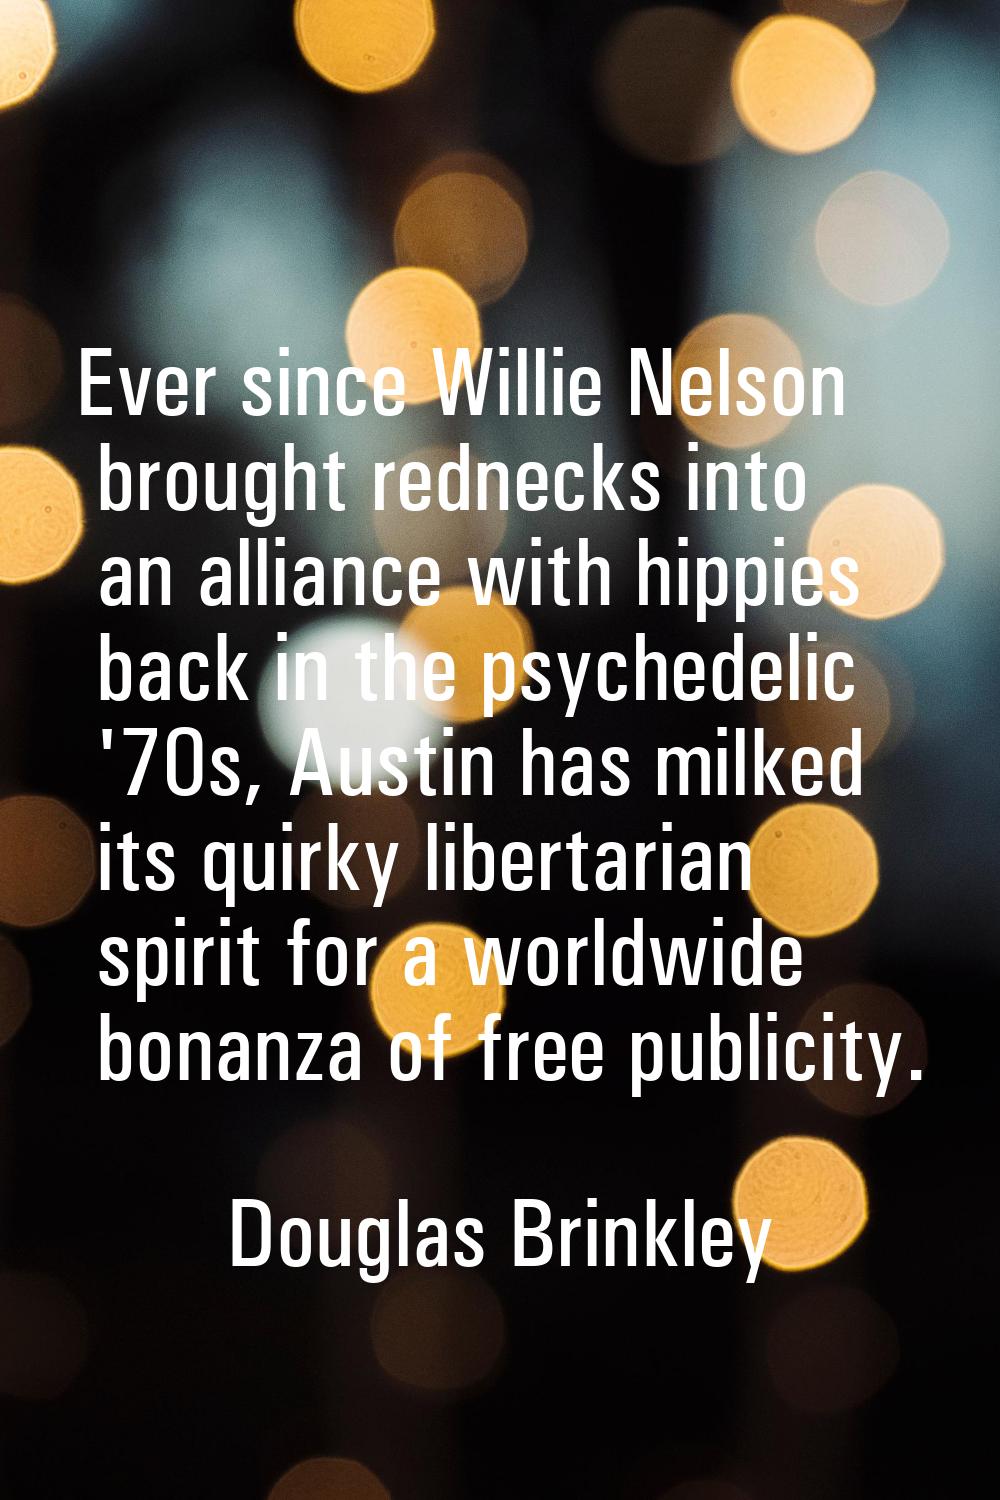 Ever since Willie Nelson brought rednecks into an alliance with hippies back in the psychedelic '70